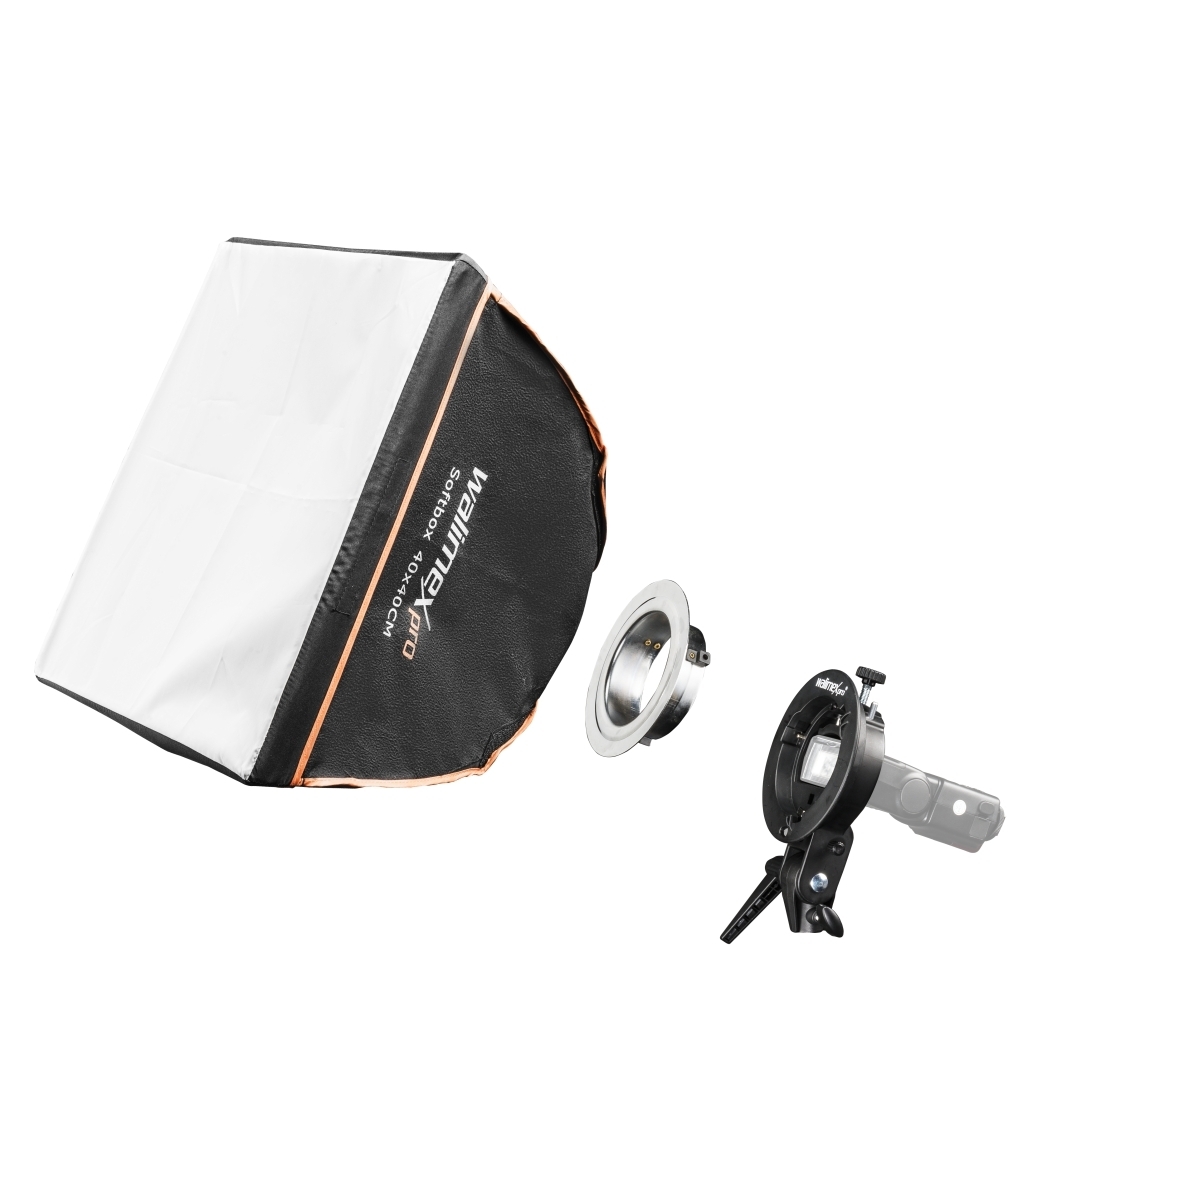 Walimex pro Softbox 40x40cm for Compact Flashes